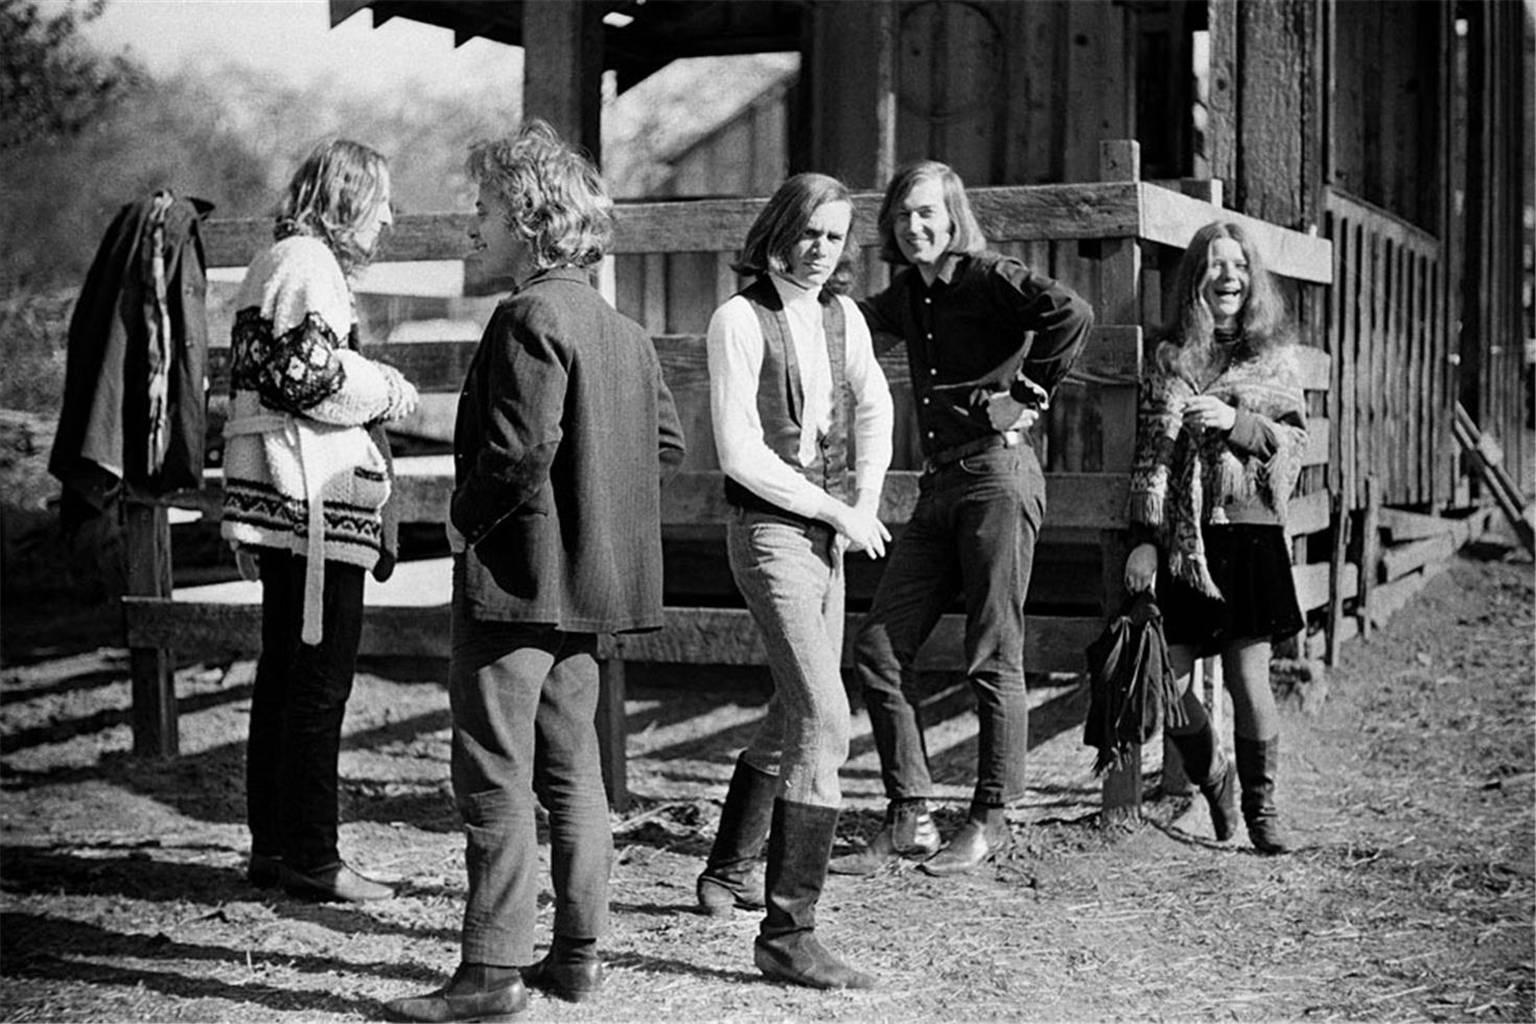 Lisa Law Black and White Photograph - Big Brother and the Holding Company, CA 1967